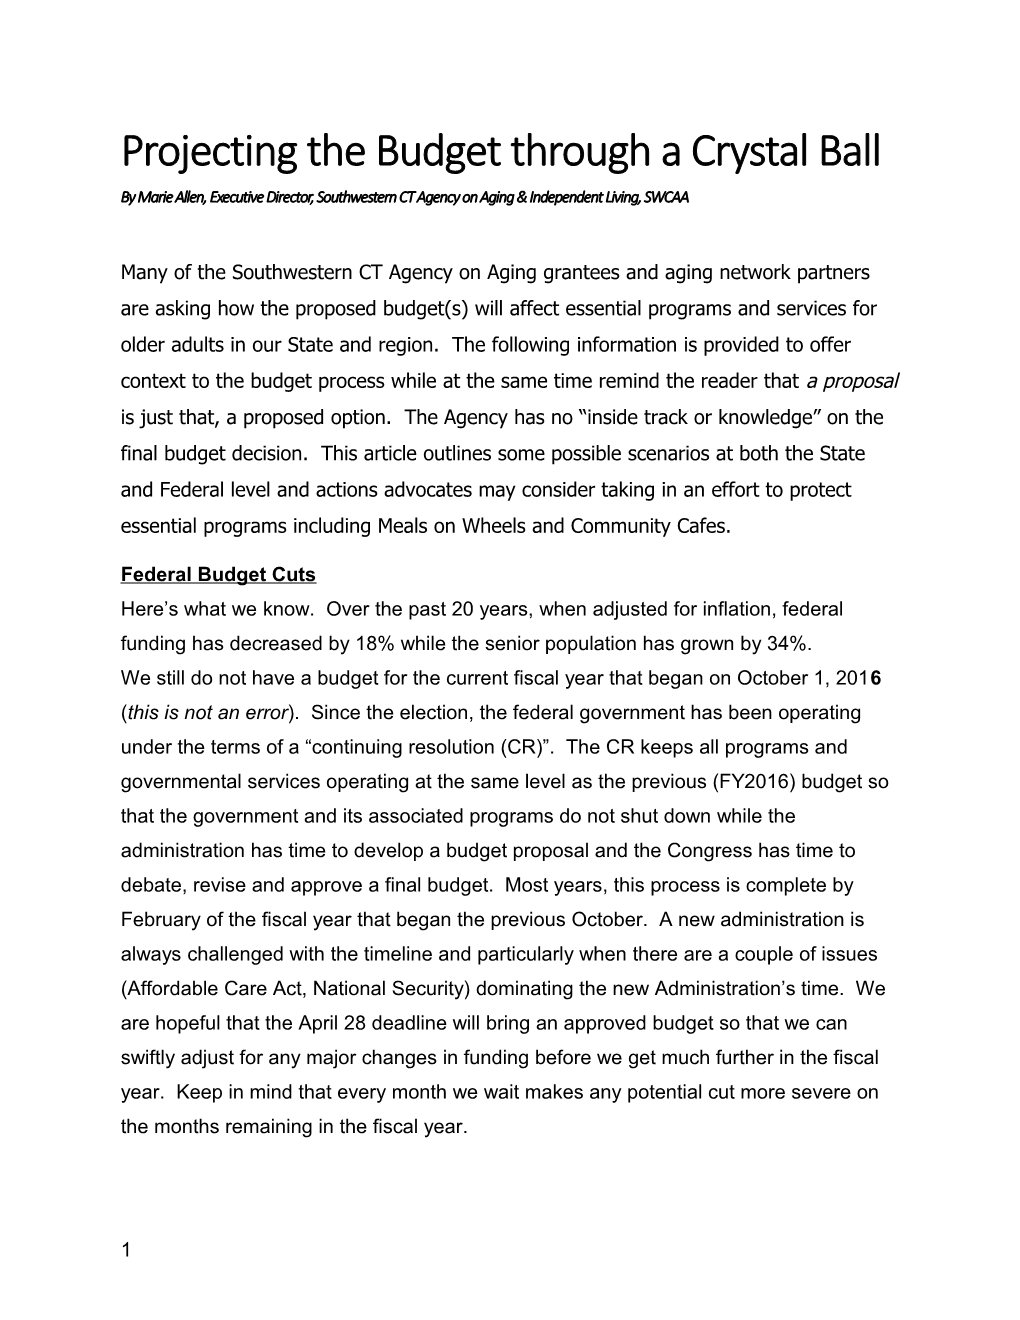 Projecting the Budget Through a Crystal Ball